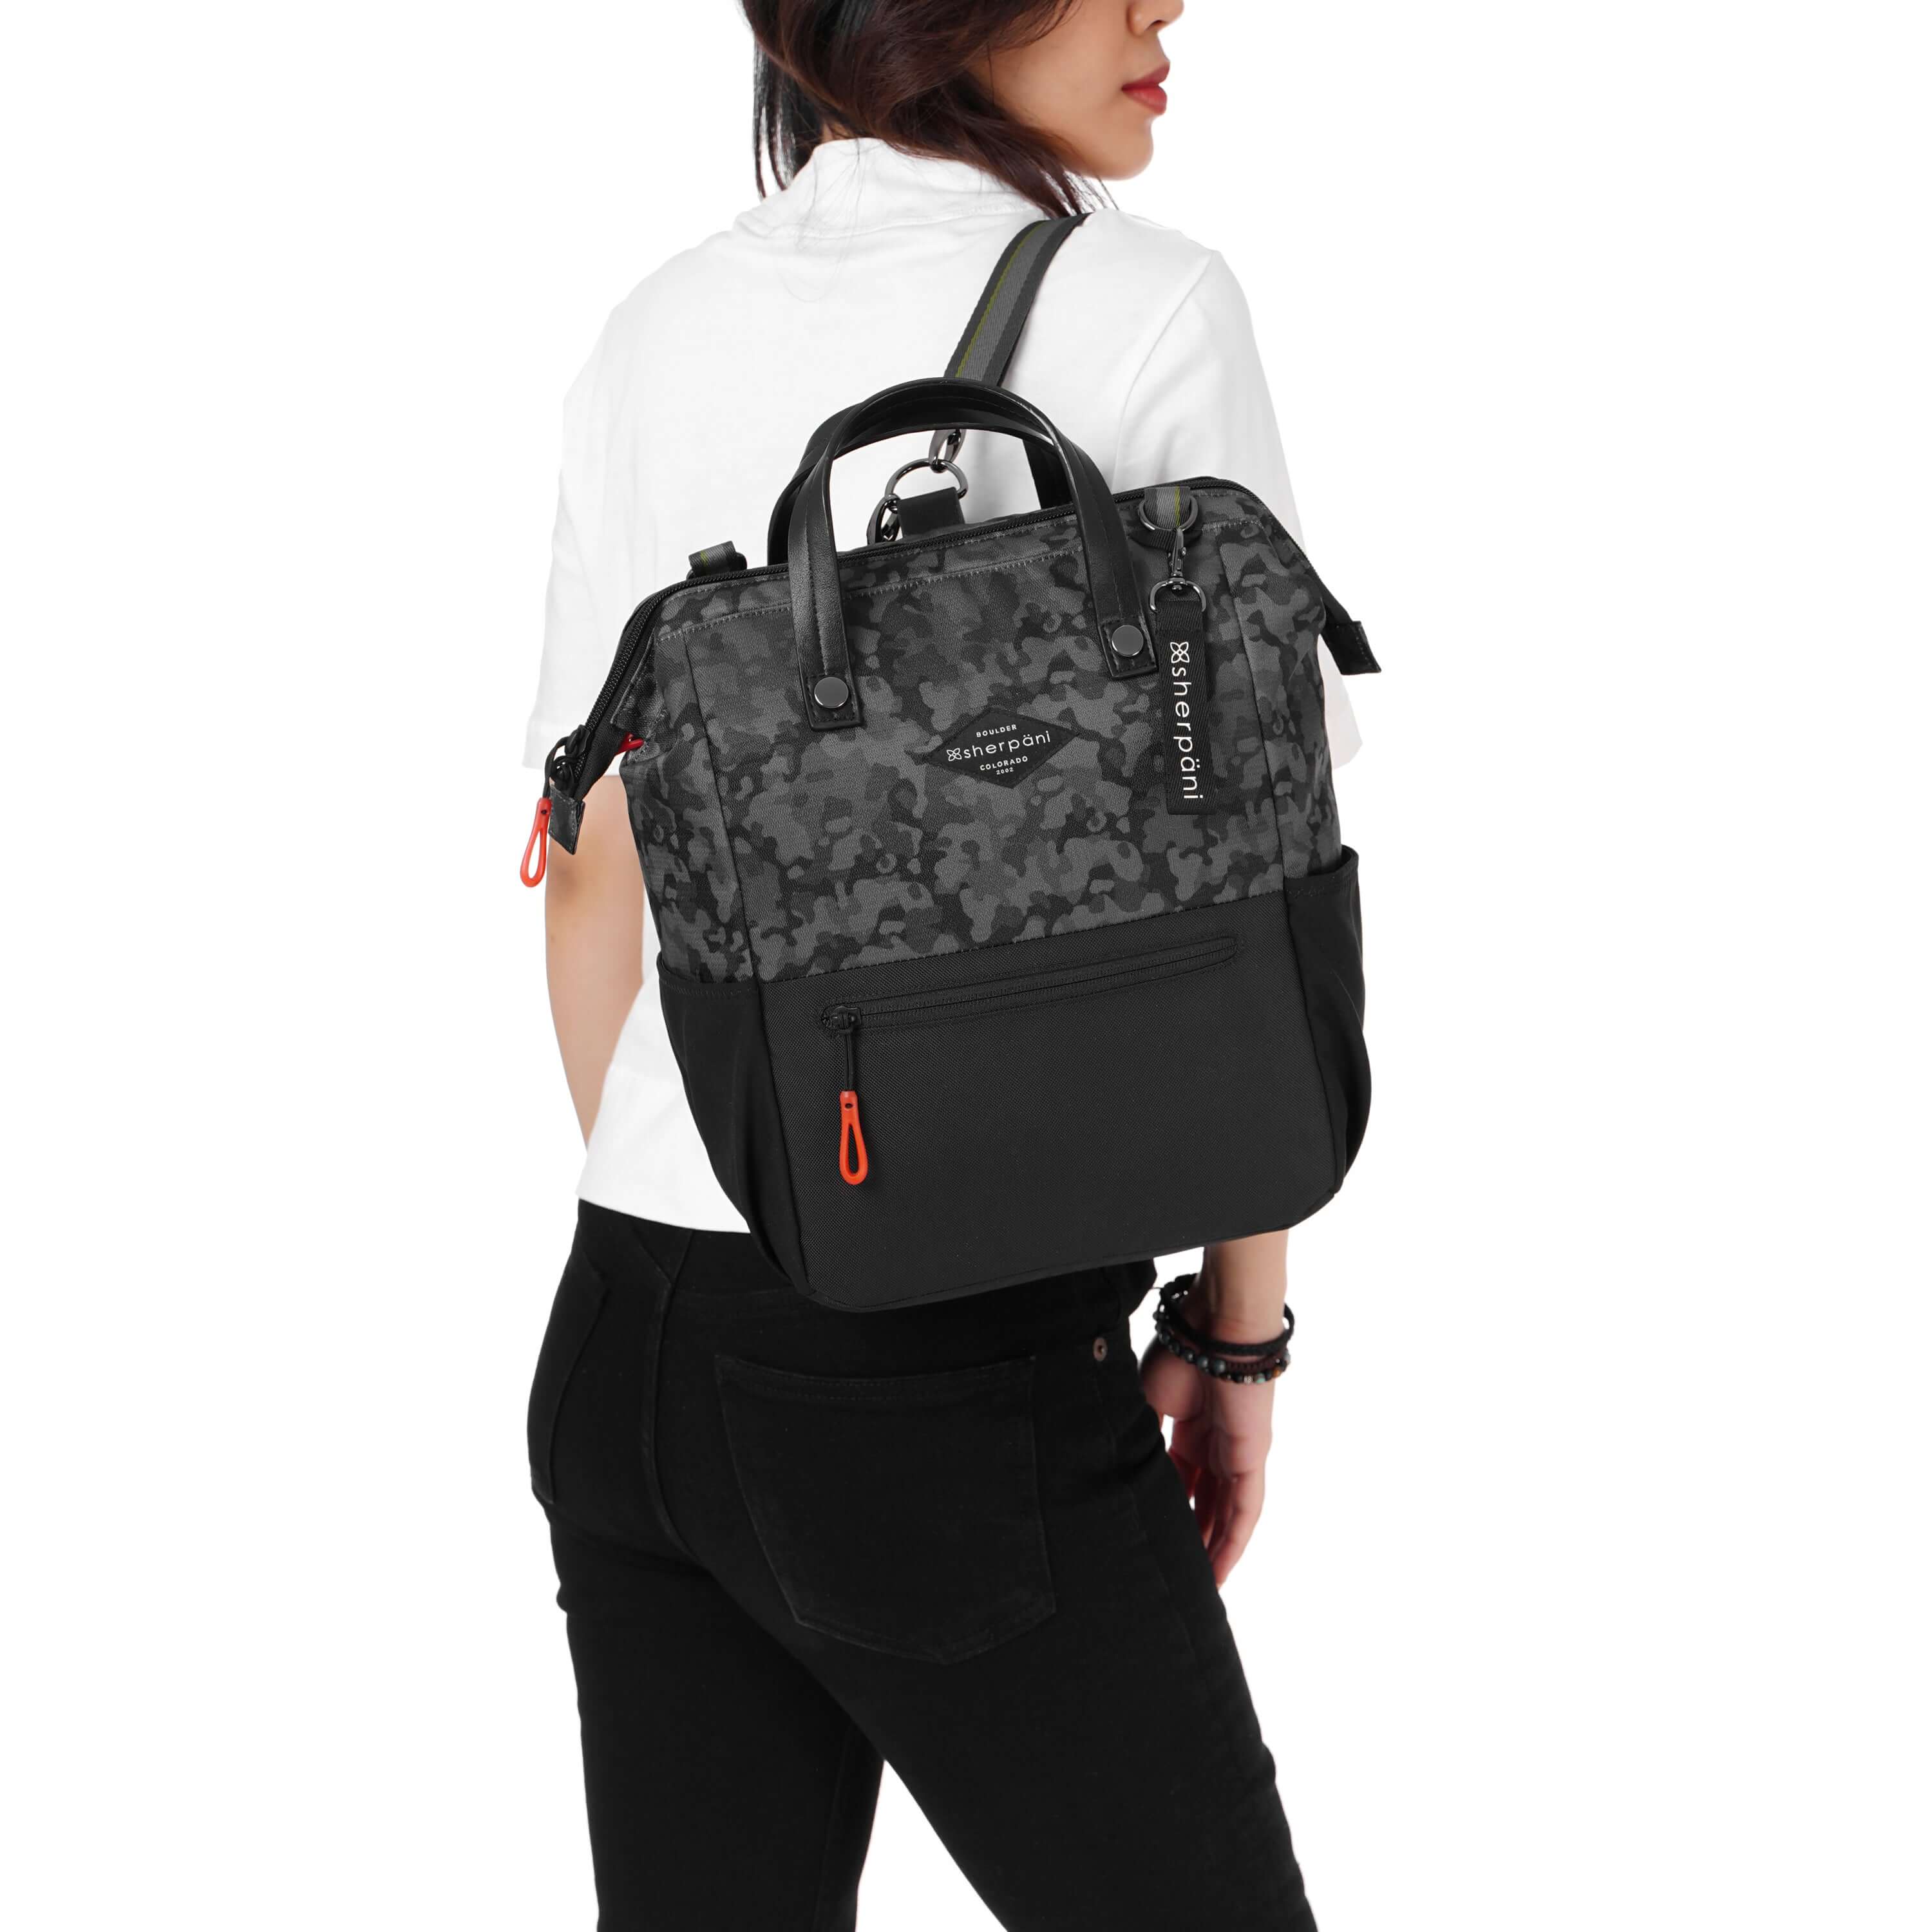 Close up view of a dark haired model facing away from the camera and looking over her right shoulder. She is wearing a white tee shirt and black pants. She carries Sherpani three-in-one bag, the Dispatch in Dream Camo, as a backpack.